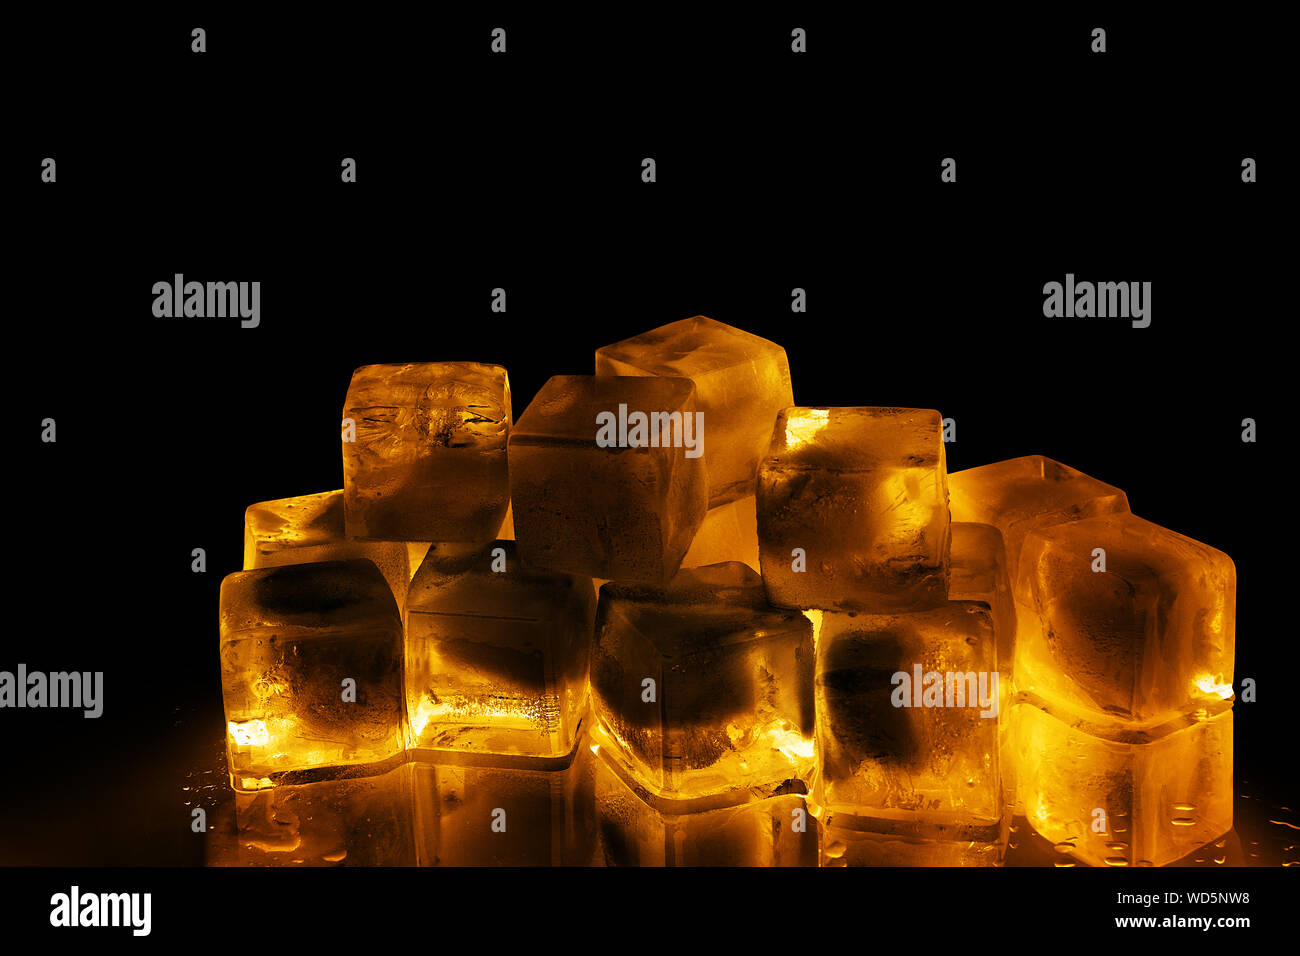 Download Golden Ice Cubes On Black Background Isolated Close Up Transparent Frozen Amber Color Water With Yellow Back Light And Reflection Cold Alcohol Drink Stock Photo Alamy Yellowimages Mockups